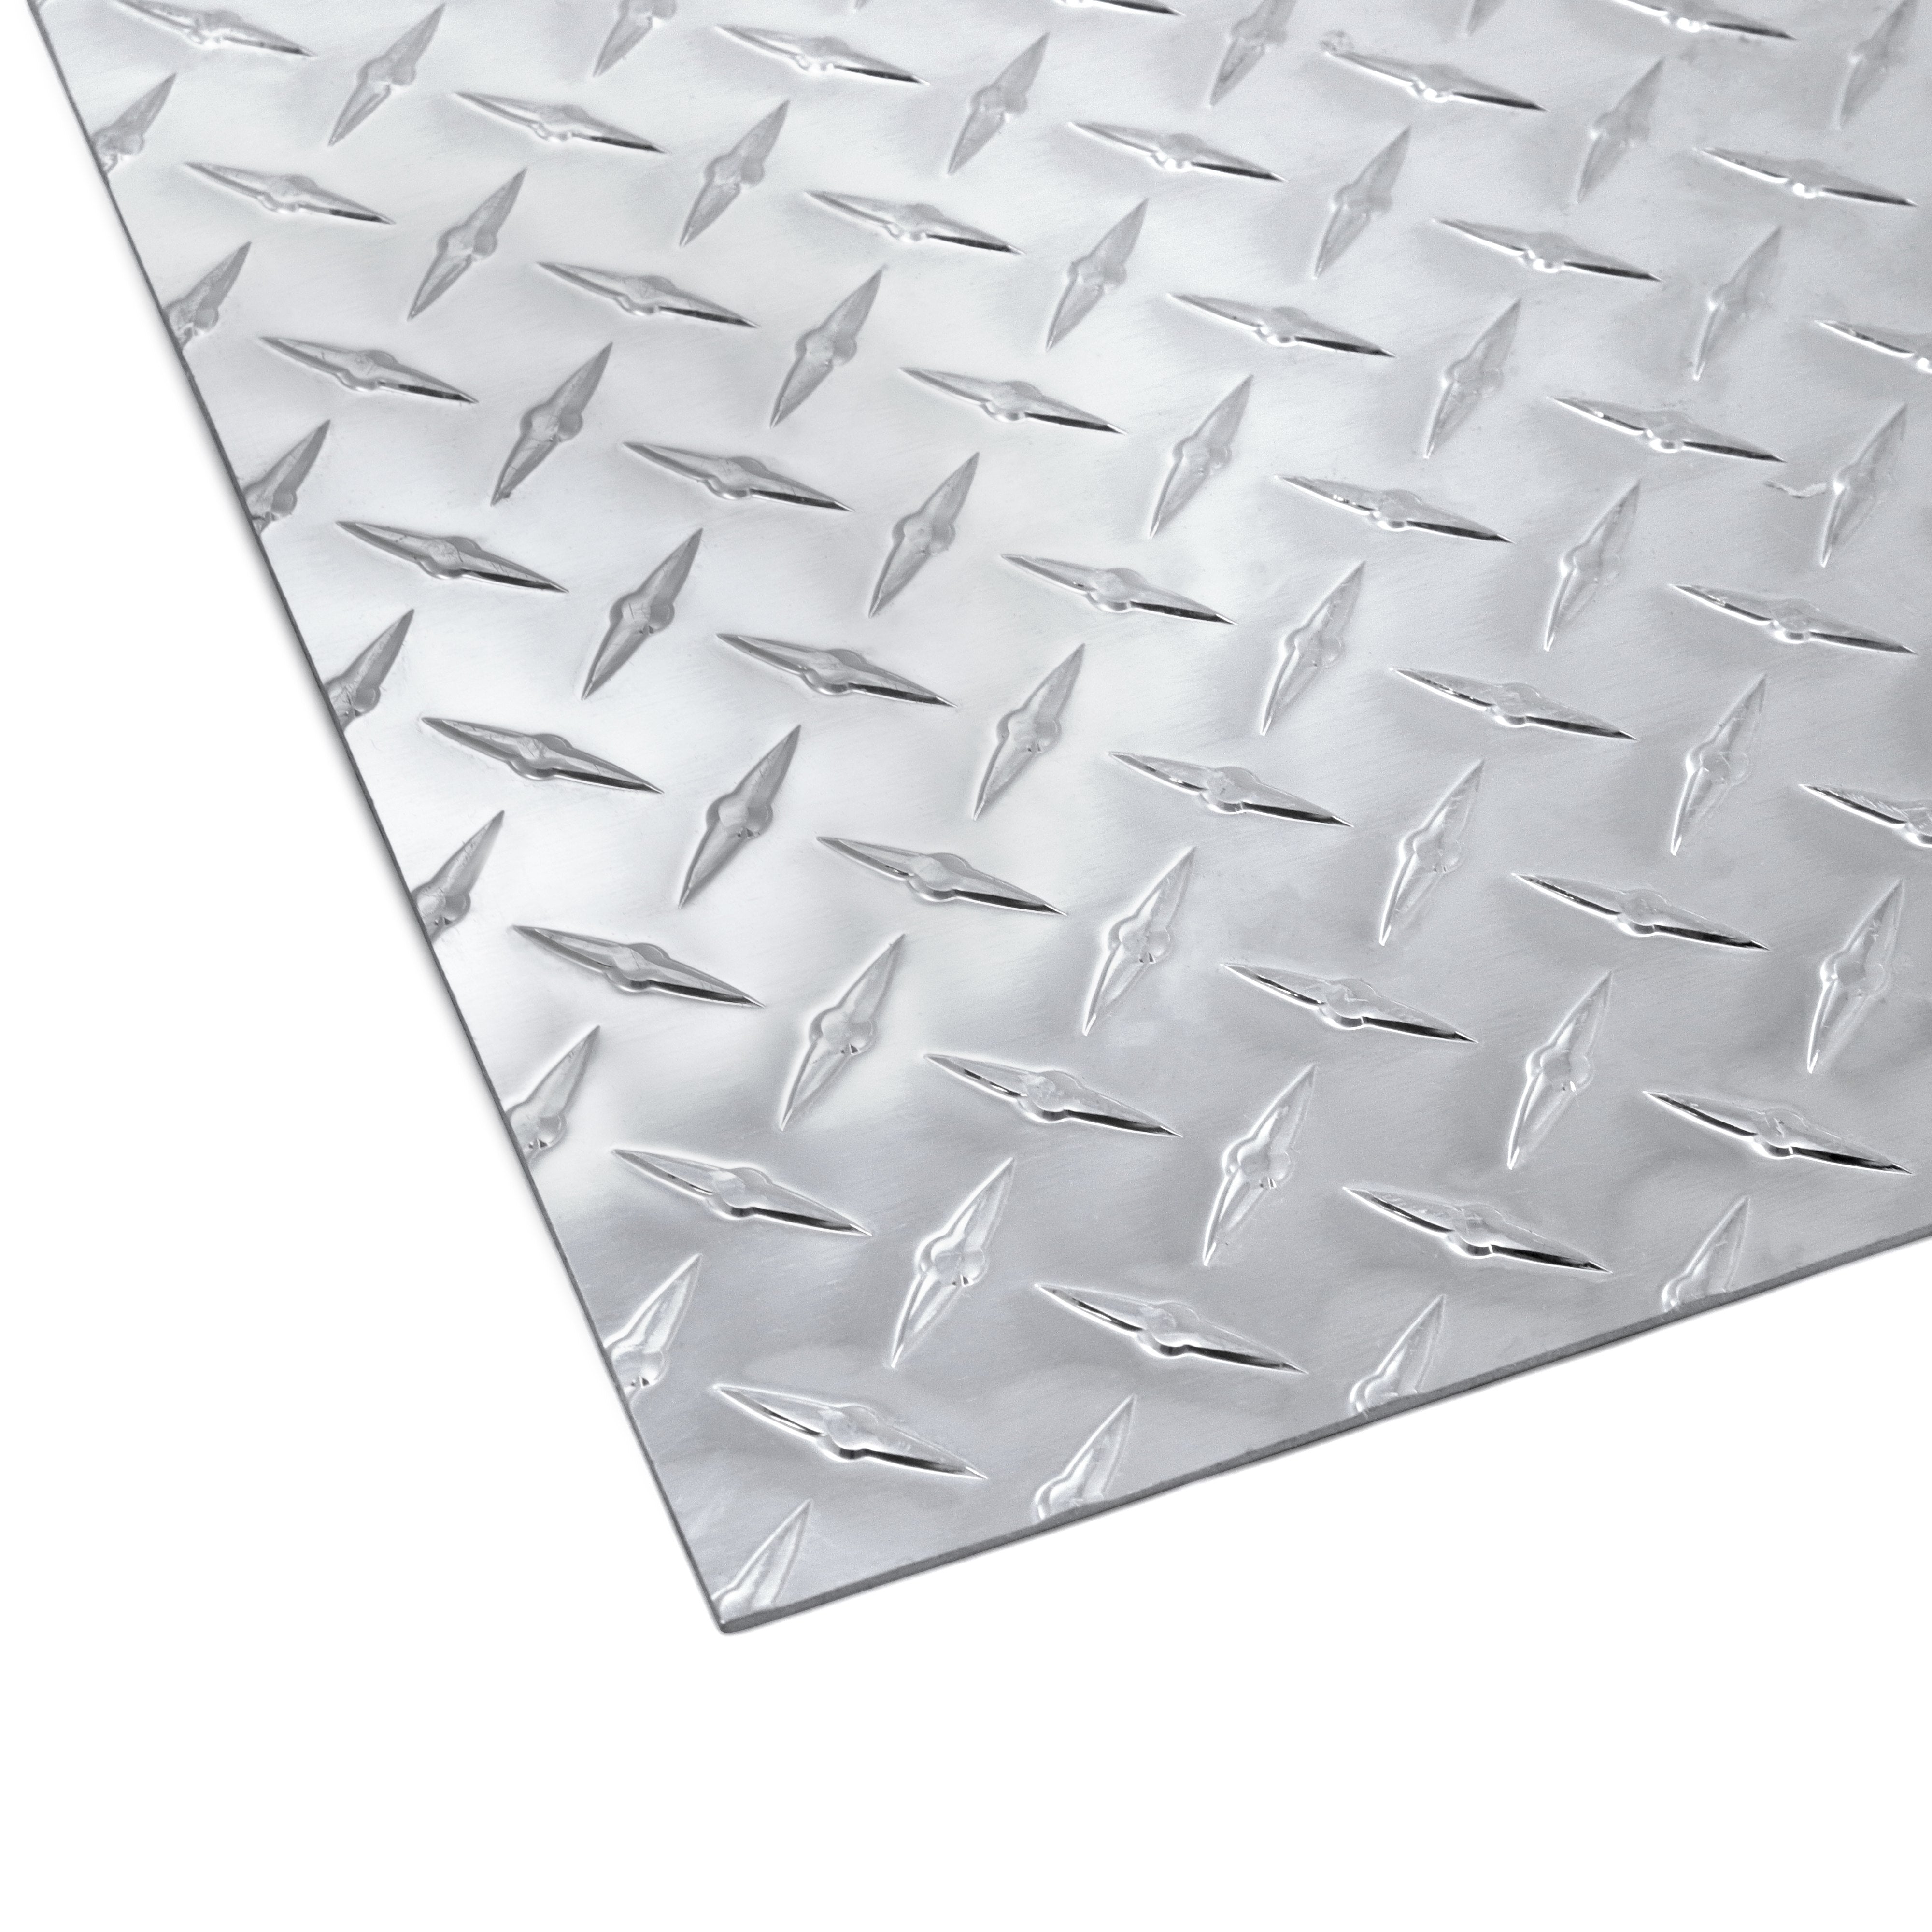 Polished Aluminum Tread Diamond Plate Solid Metal Durable Bright for Indoor Outdoor Automotive Heavy Duty .063 1/16 Inch Thick, 1 x 1 Foot Sheet